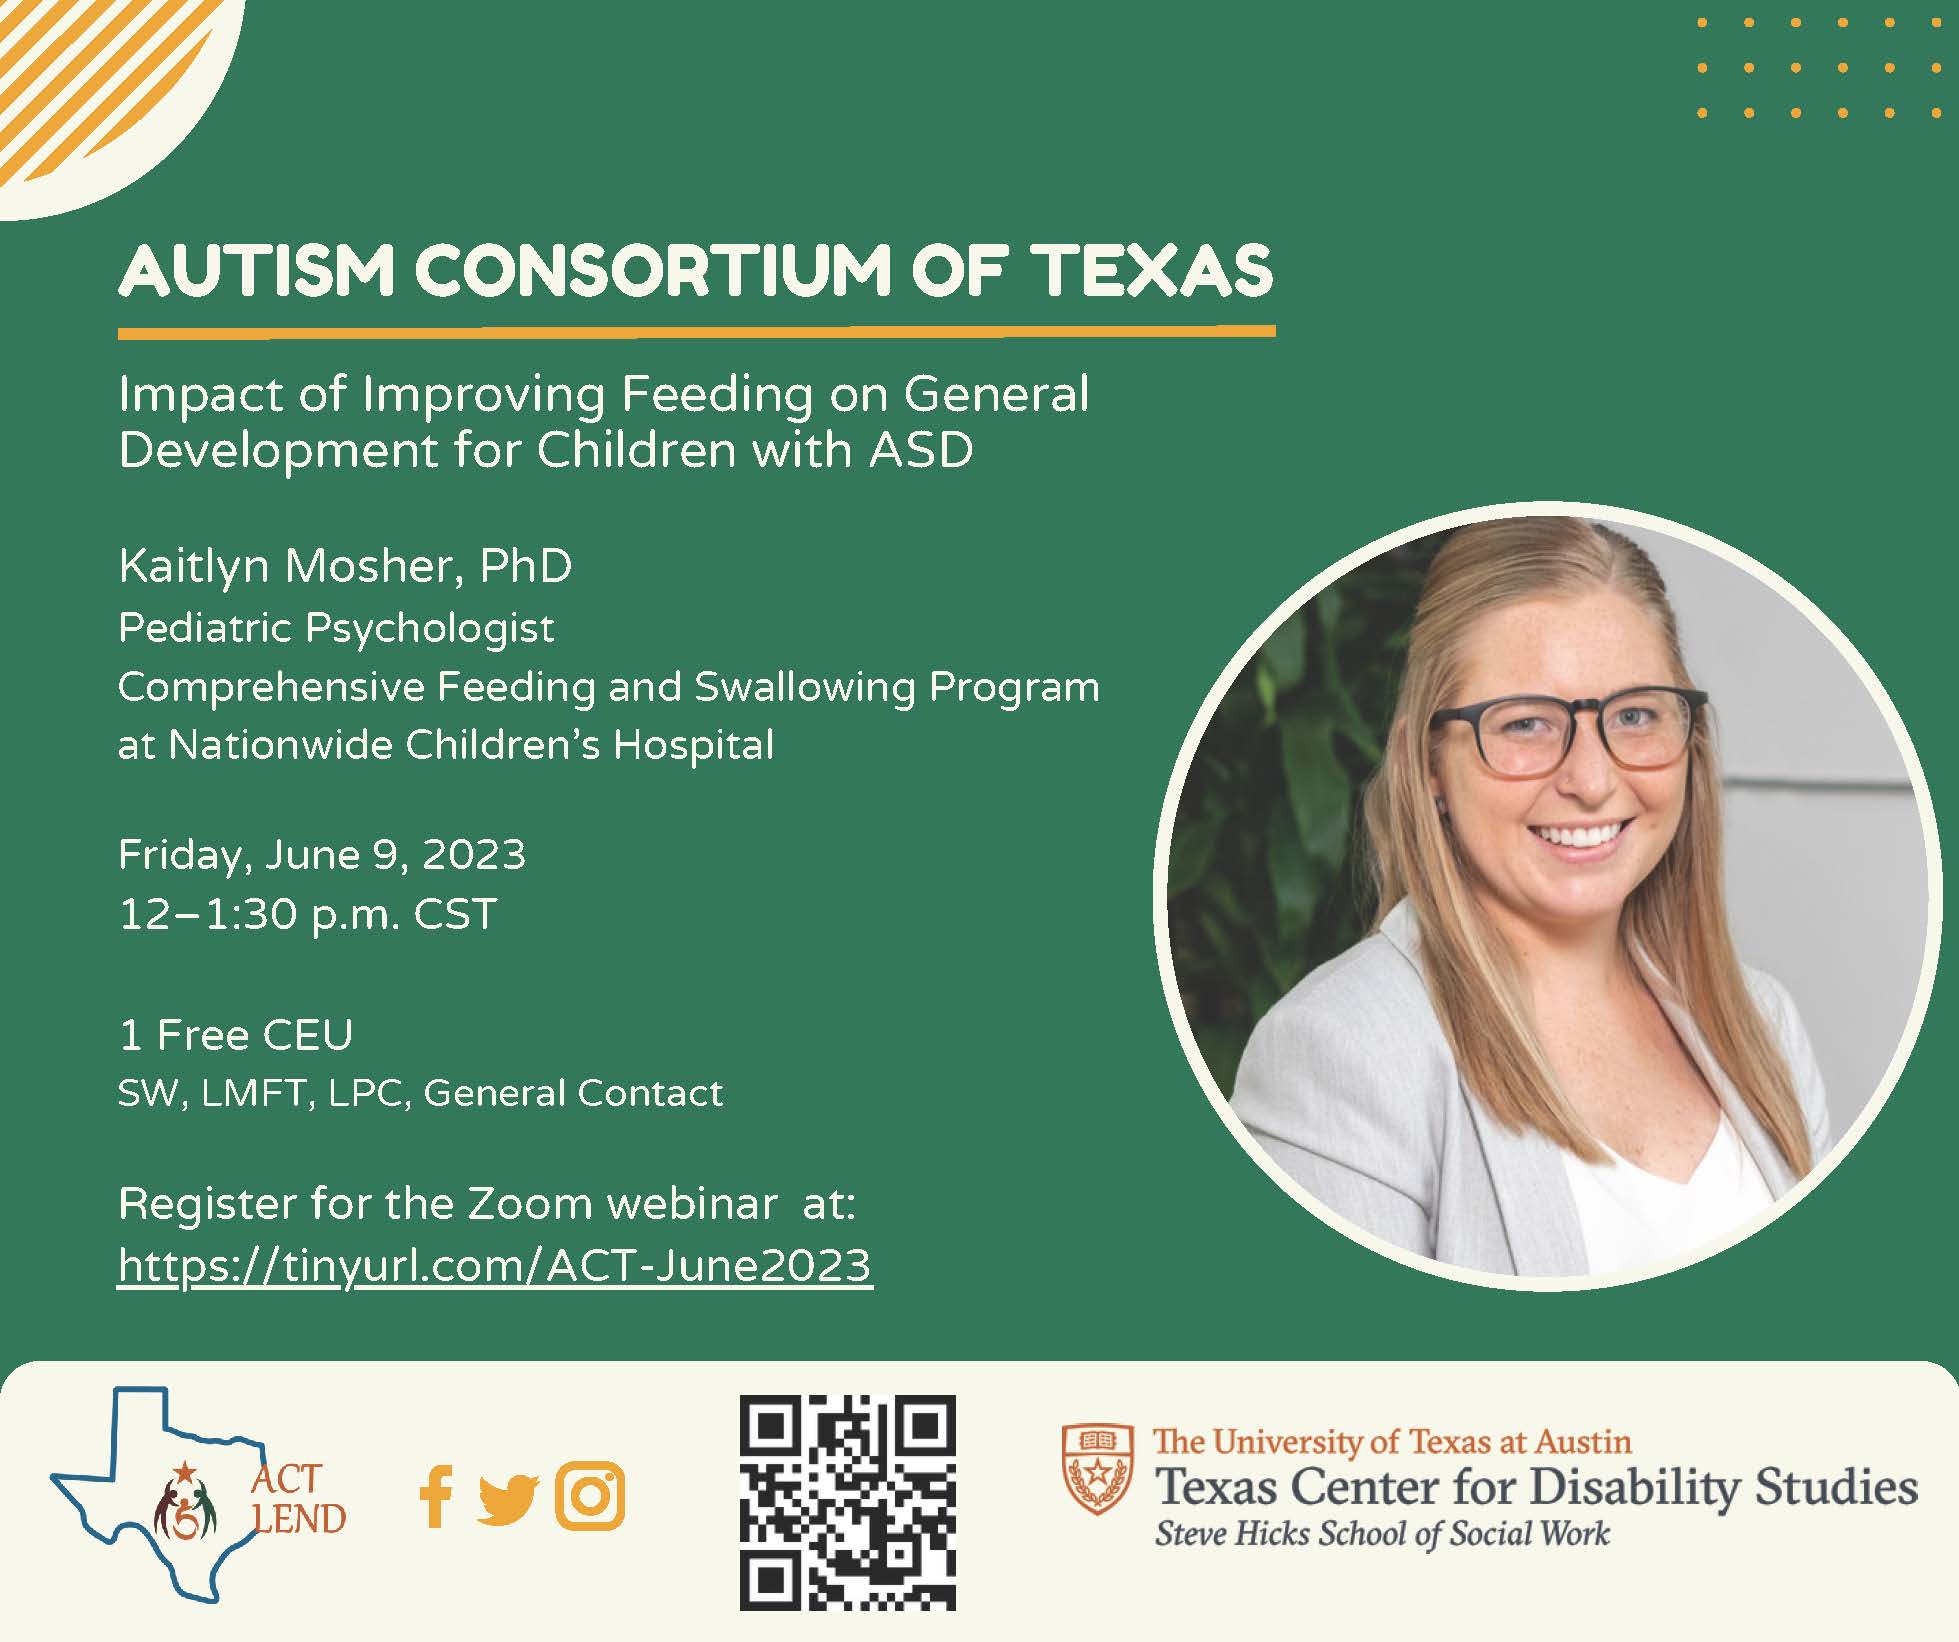 Flyer for Autism Consortium of Texas June Webinar to be held on Friday, June 9, 2023 at 12PM CST